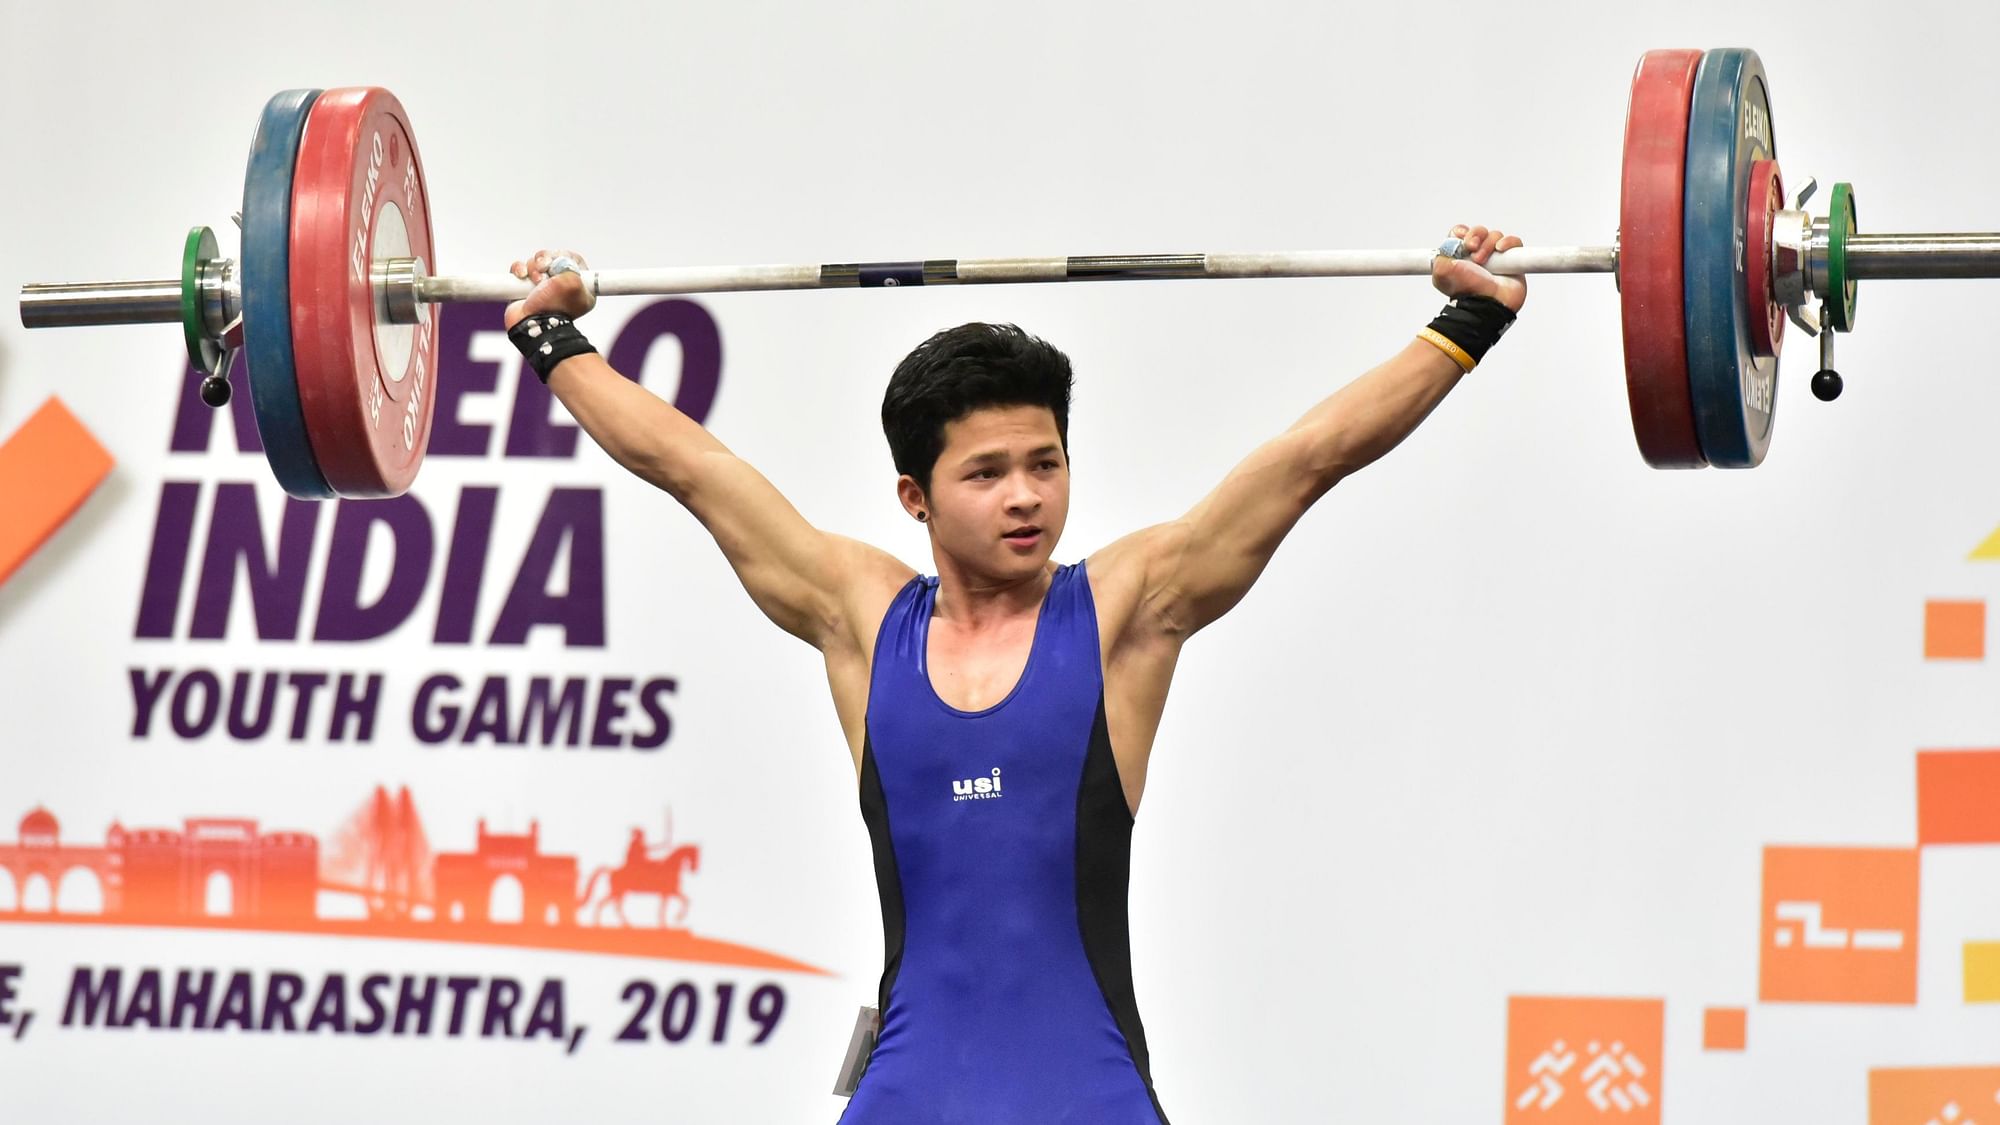 Jeremy Lalrinnunga, first Indian to win a gold medal at the Youth Olympic Games, on Sunday, 29 December said he is fulfilling his father’s dream by representing the country in various senior weightlifting competitions.